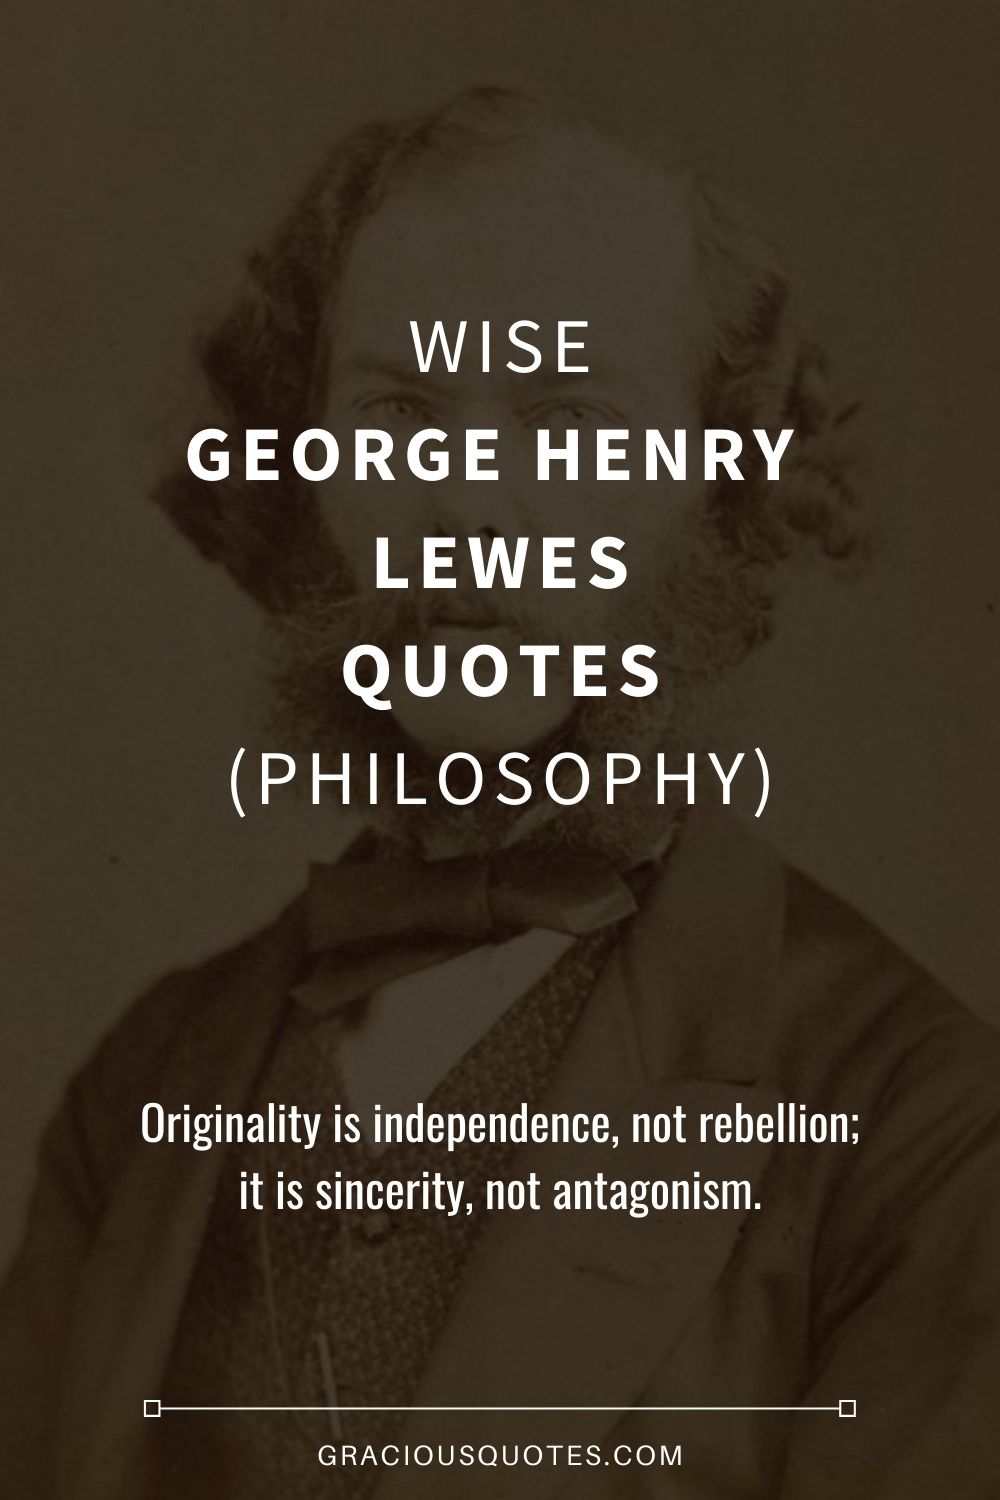 Wise George Henry Lewes Quotes (PHILOSOPHY) - Gracious Quotes